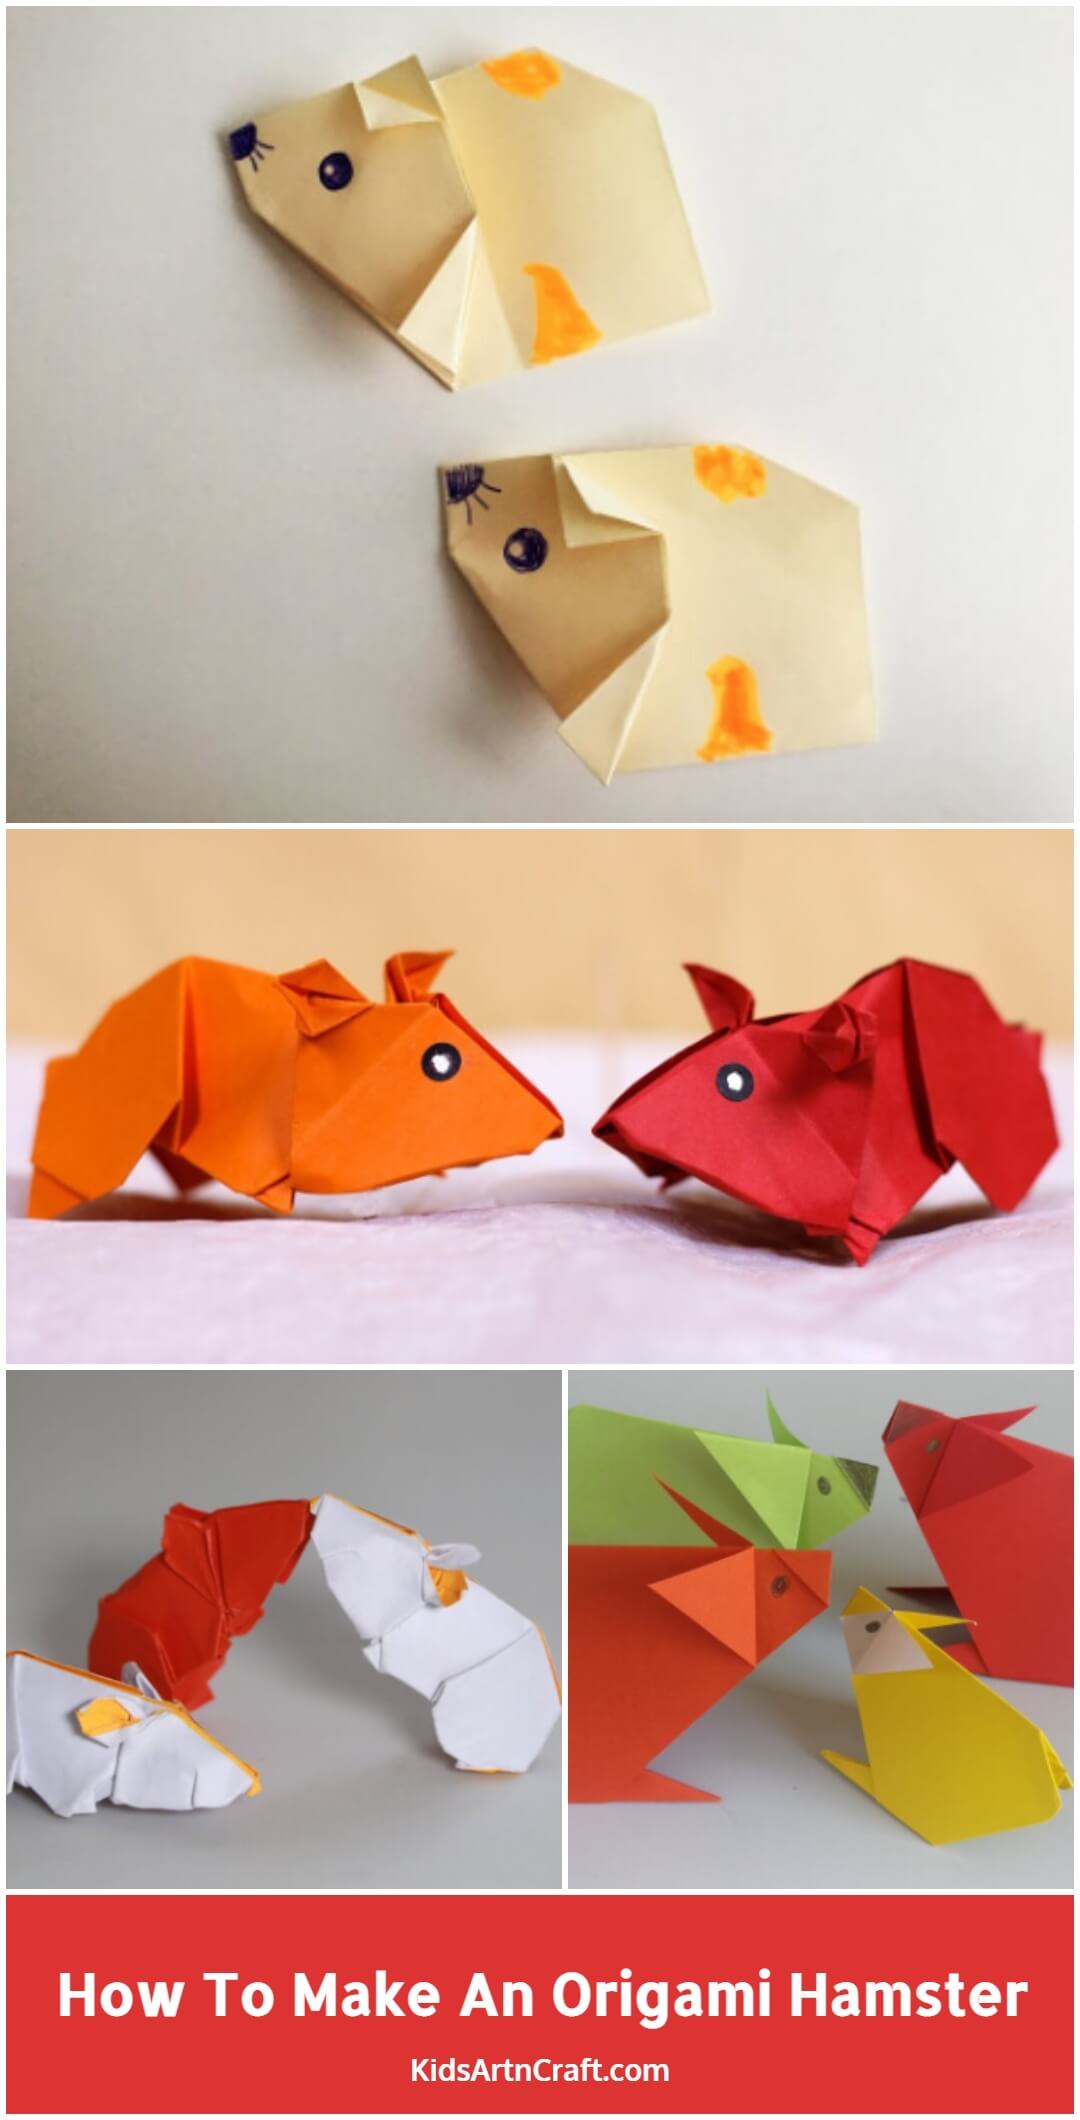 How To Make An Origami Hamster With Kids